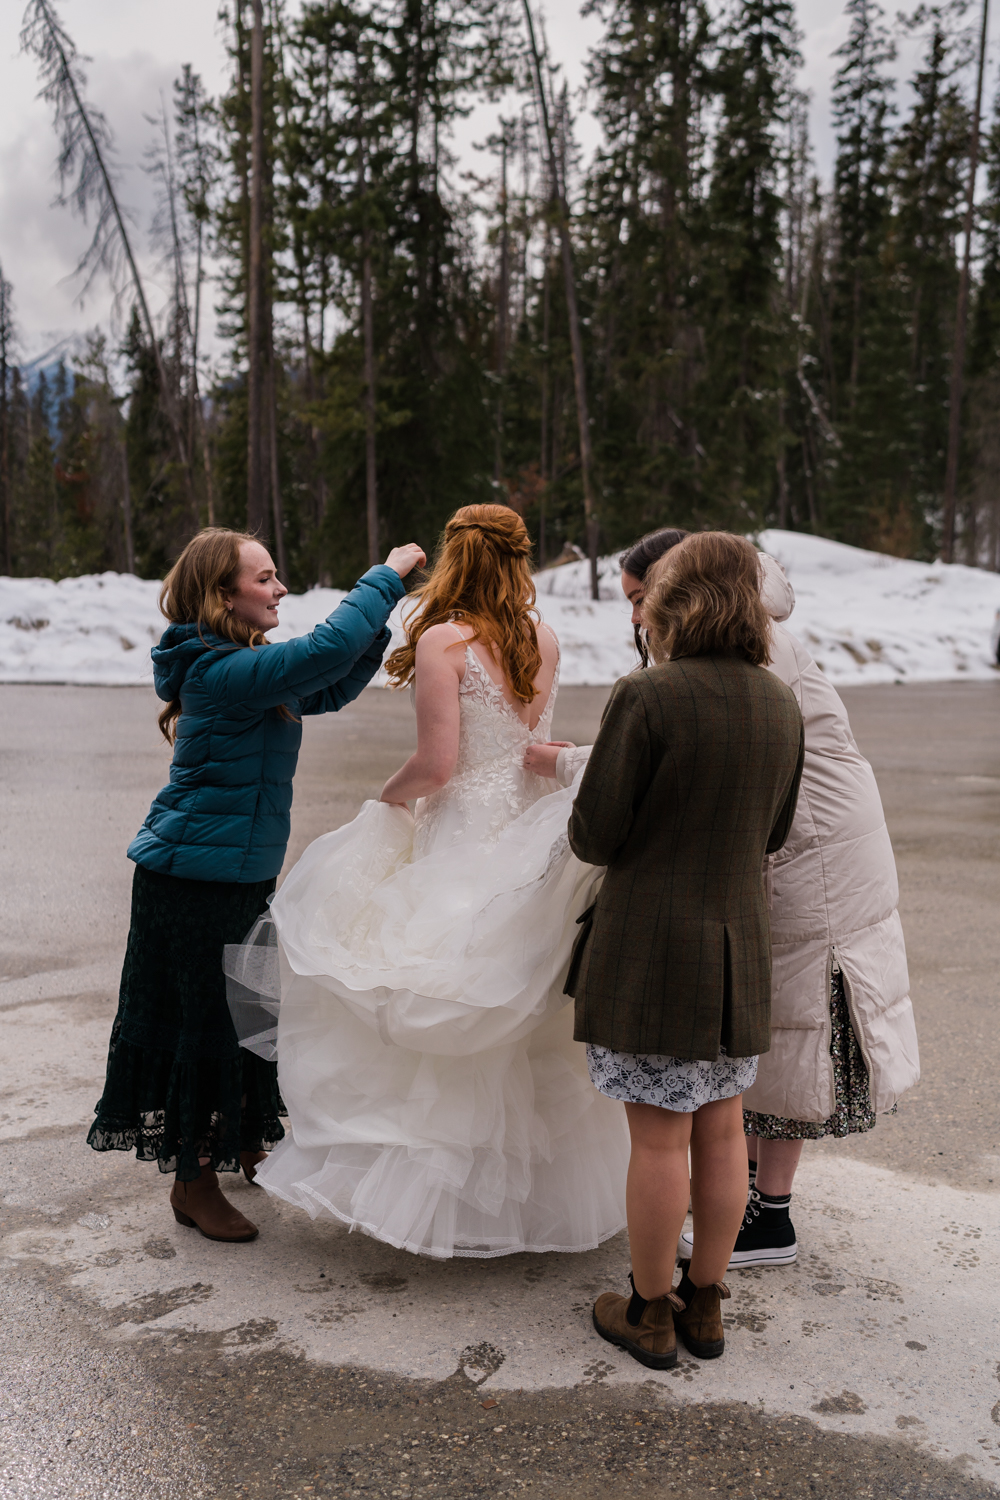 Bride gets ready with her three friends doing up her dress and fixing her hair in the parking lot for her Emerald Lake elopement